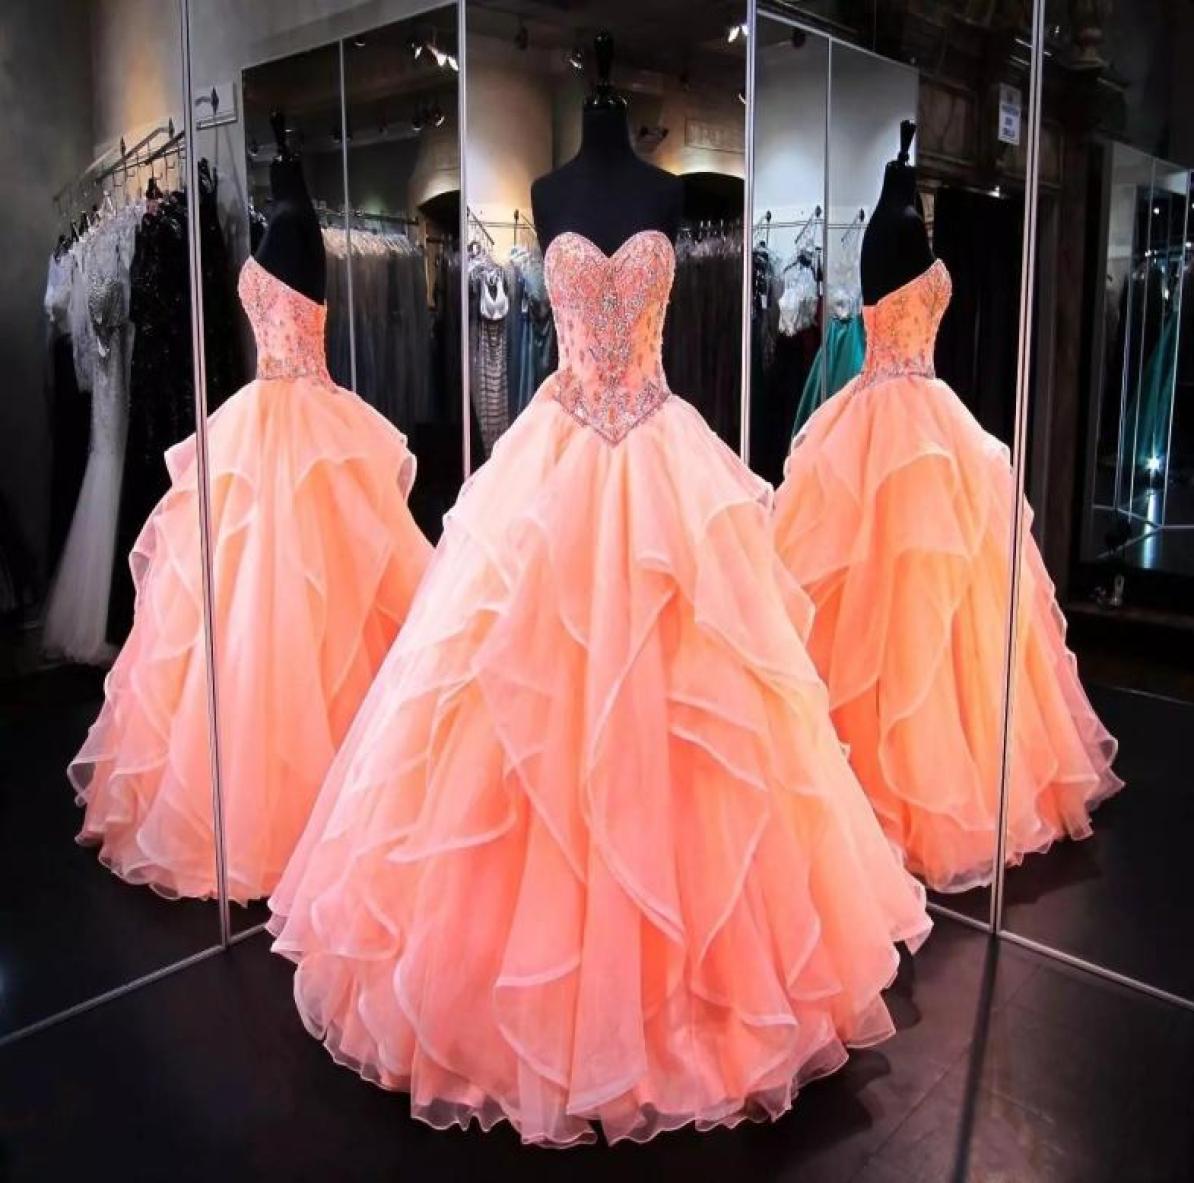 

Coral Quinceanera Dresses Sweetheart Masquerade Ball Gowns Crystal Beaded Corset Organza Ruffles Floor Length Long Sweet 16 Prom G1609123, Lavender \lilac